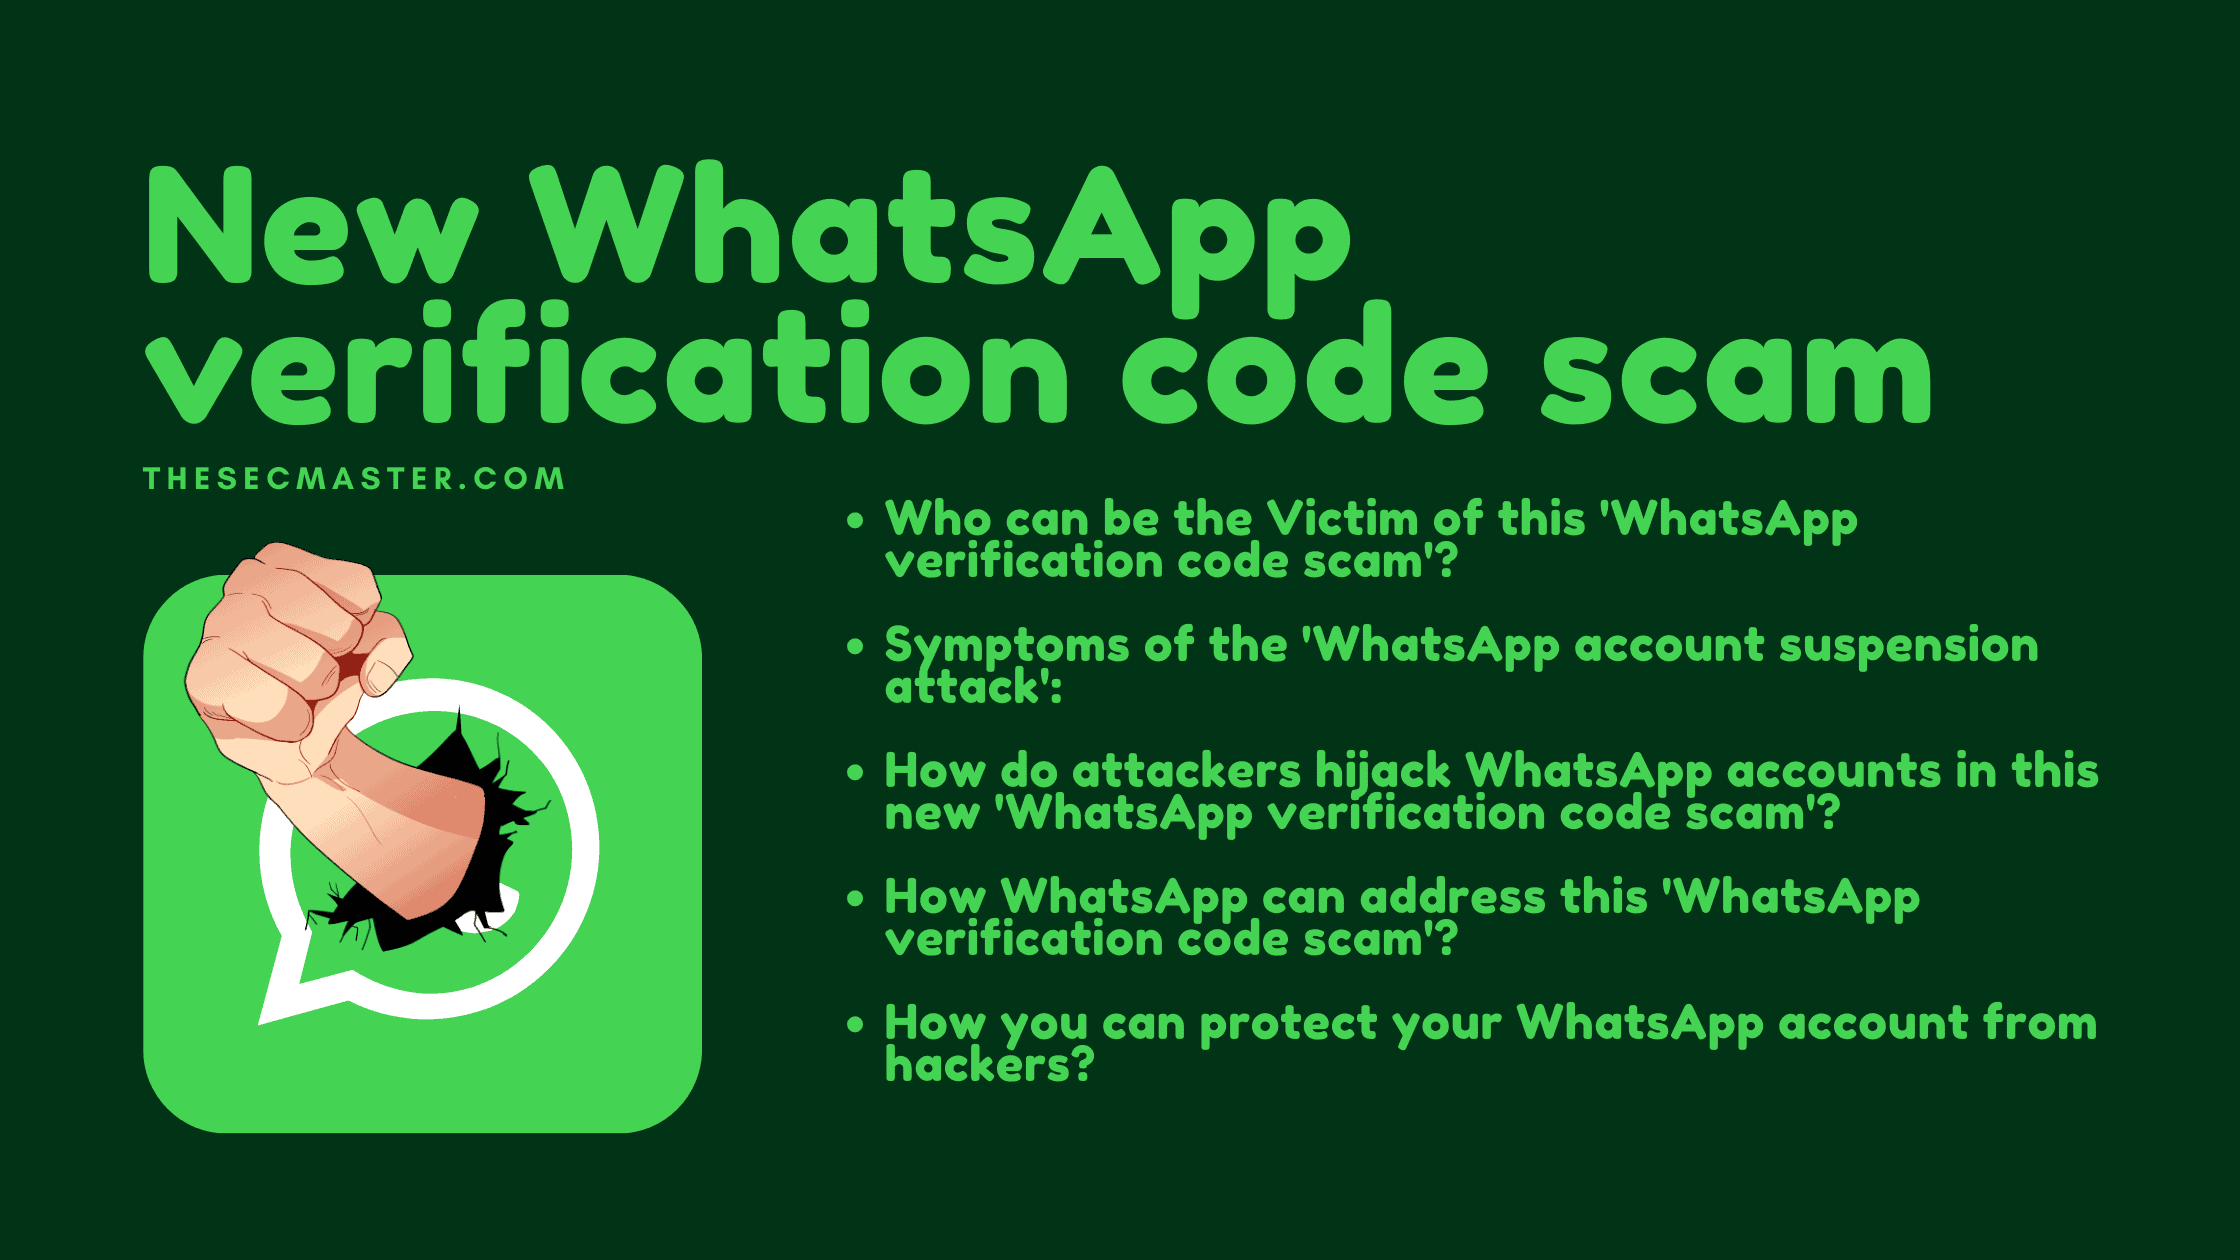 New Whatsapp Verification Code Scam And How To Protect Whatsapp Account From Hackers